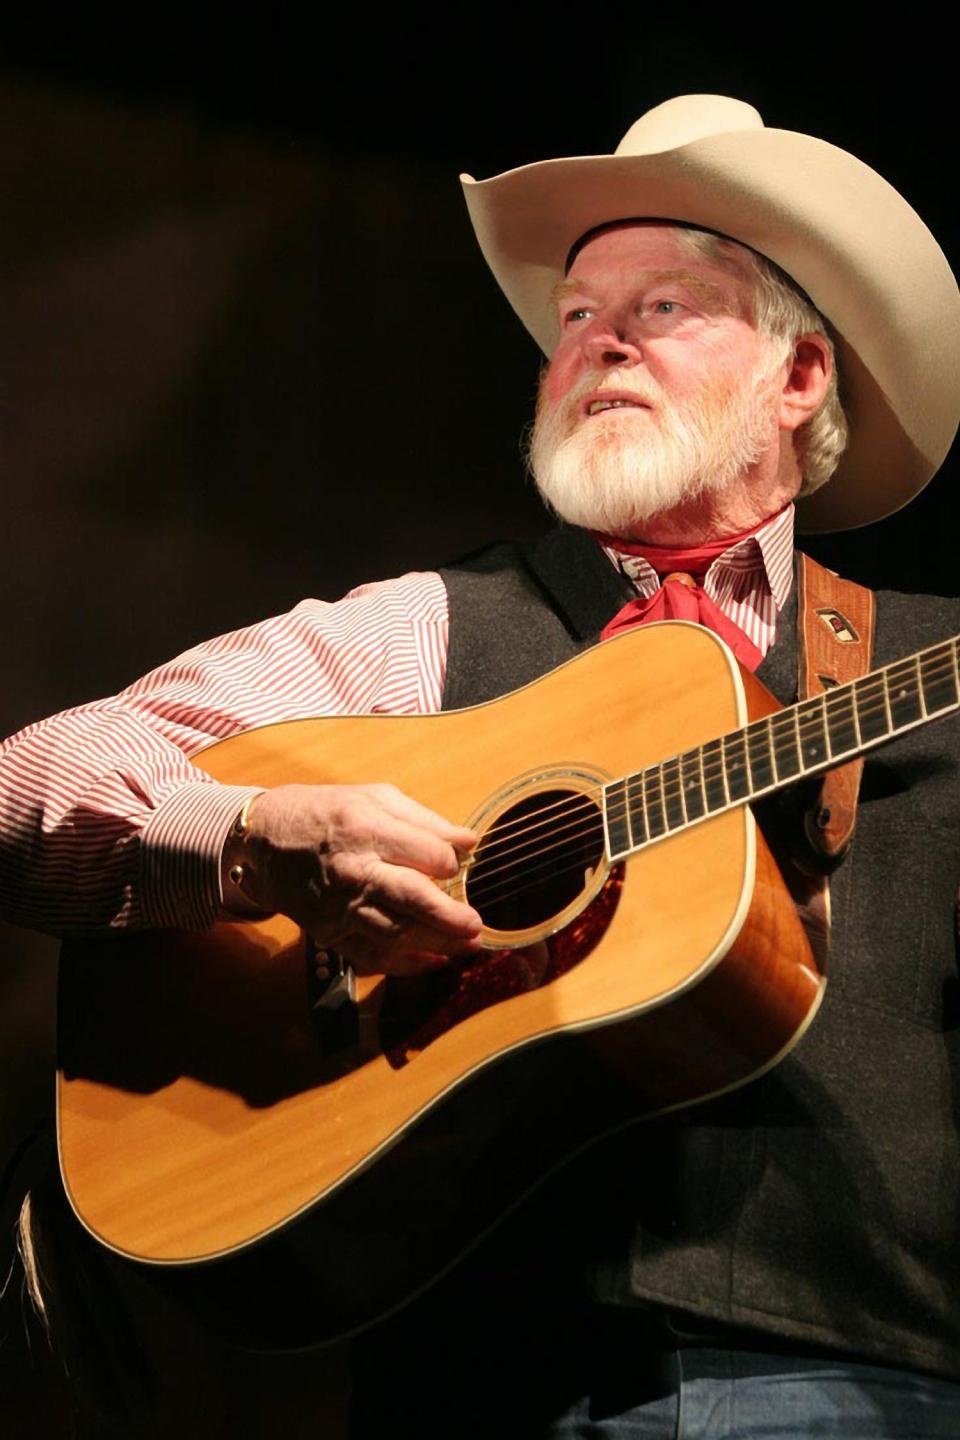 Western entertainer Red Steagall will present and perform at the 45th Annual National Golden Spur Awards.